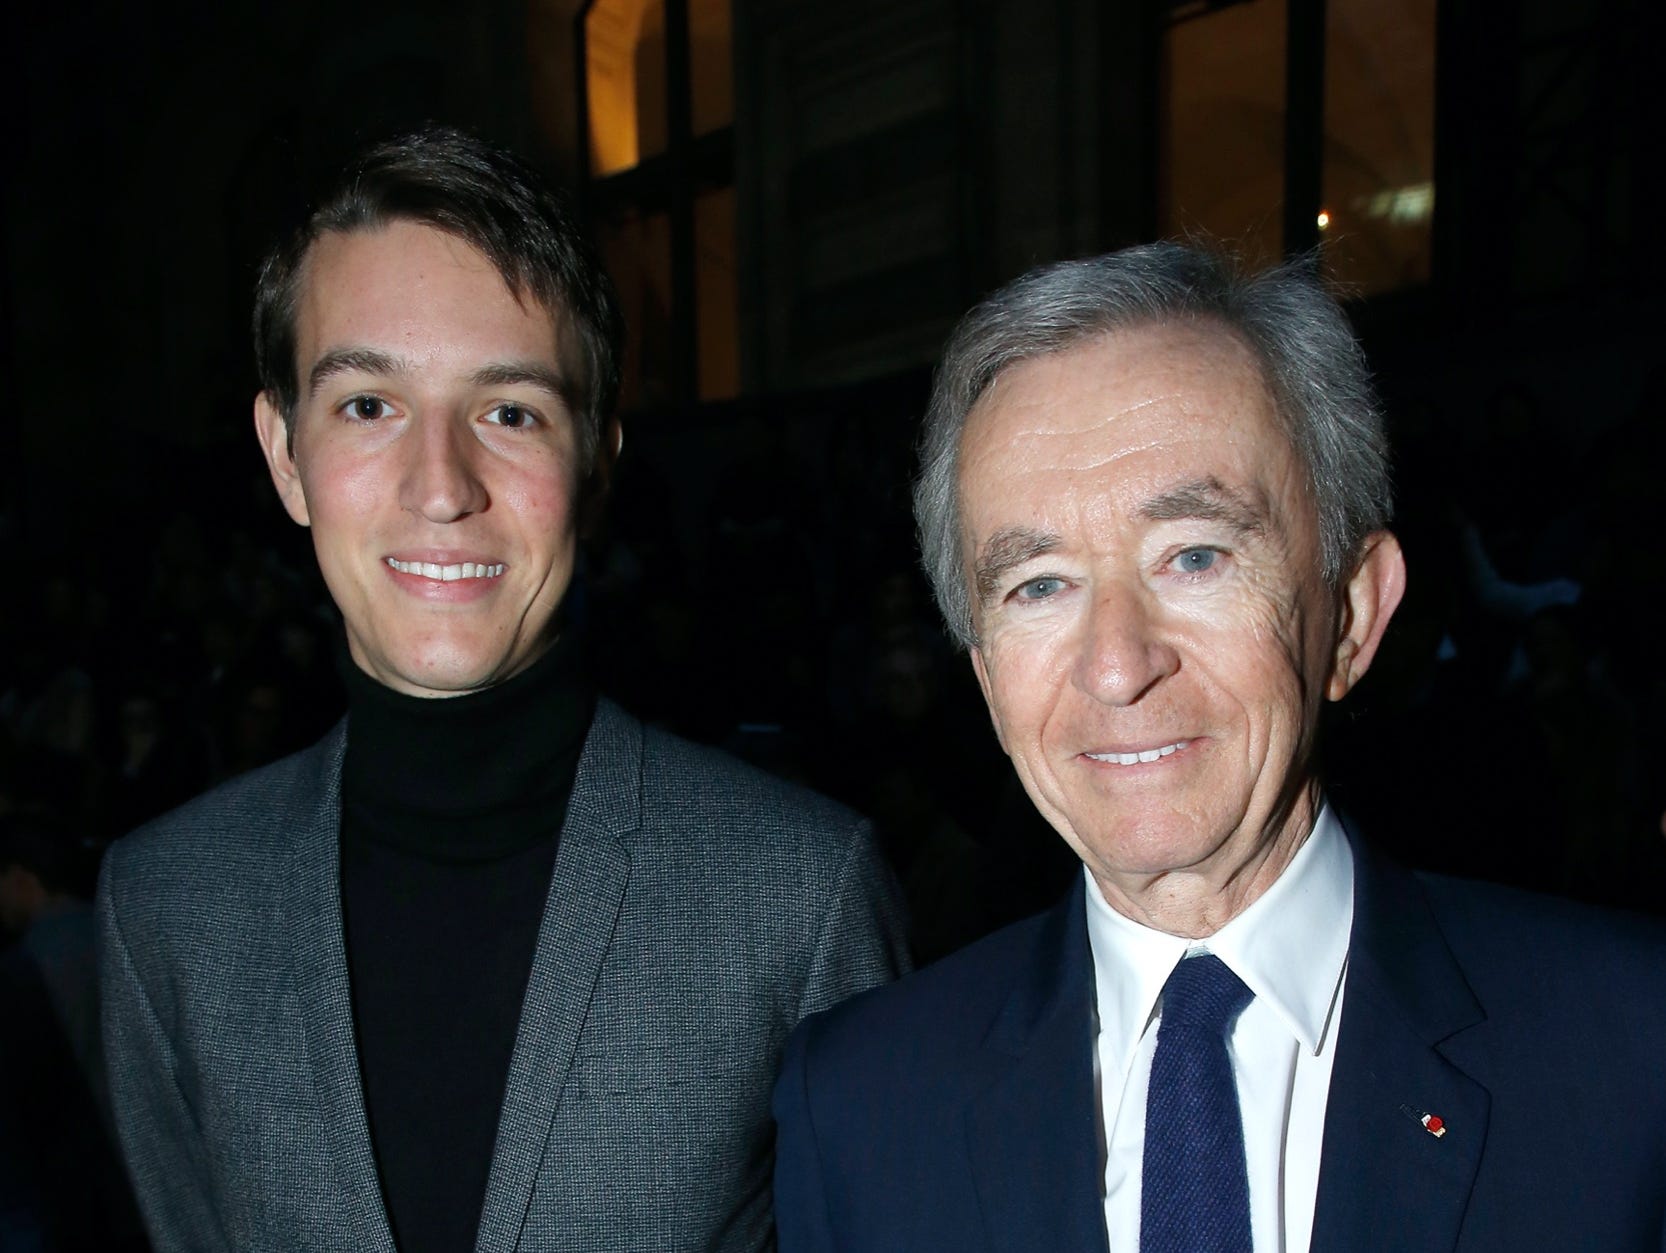 Alexandre Arnault, the 28-year-old son of Europe's richest man, is now an  executive at Tiffany & Co.